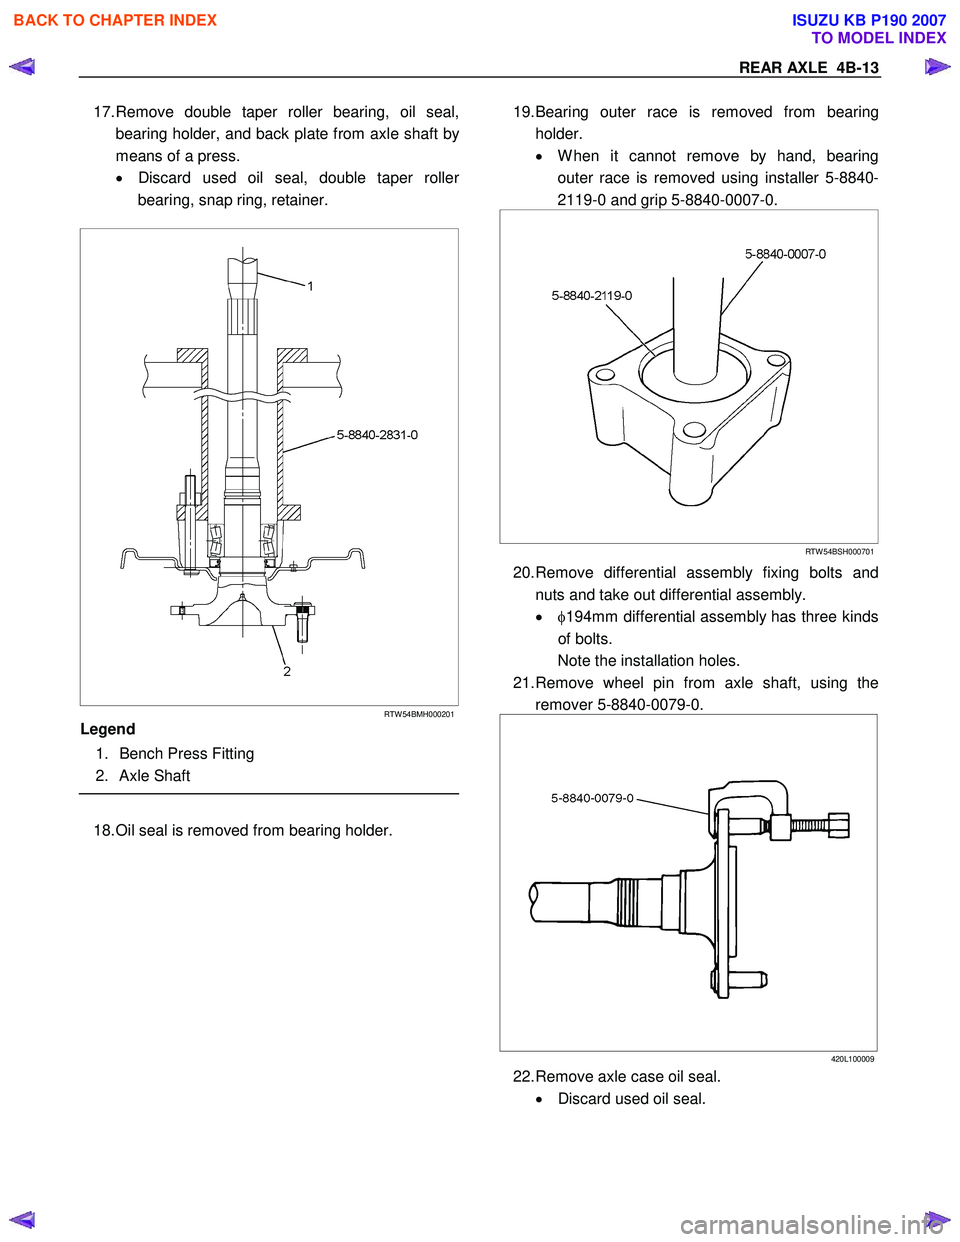 ISUZU KB P190 2007  Workshop User Guide REAR AXLE  4B-13 
17. Remove double taper roller bearing, oil seal, 
bearing holder, and back plate from axle shaft b
y
means of a press. 
•  Discard used oil seal, double taper rolle
r 
bearing, sn